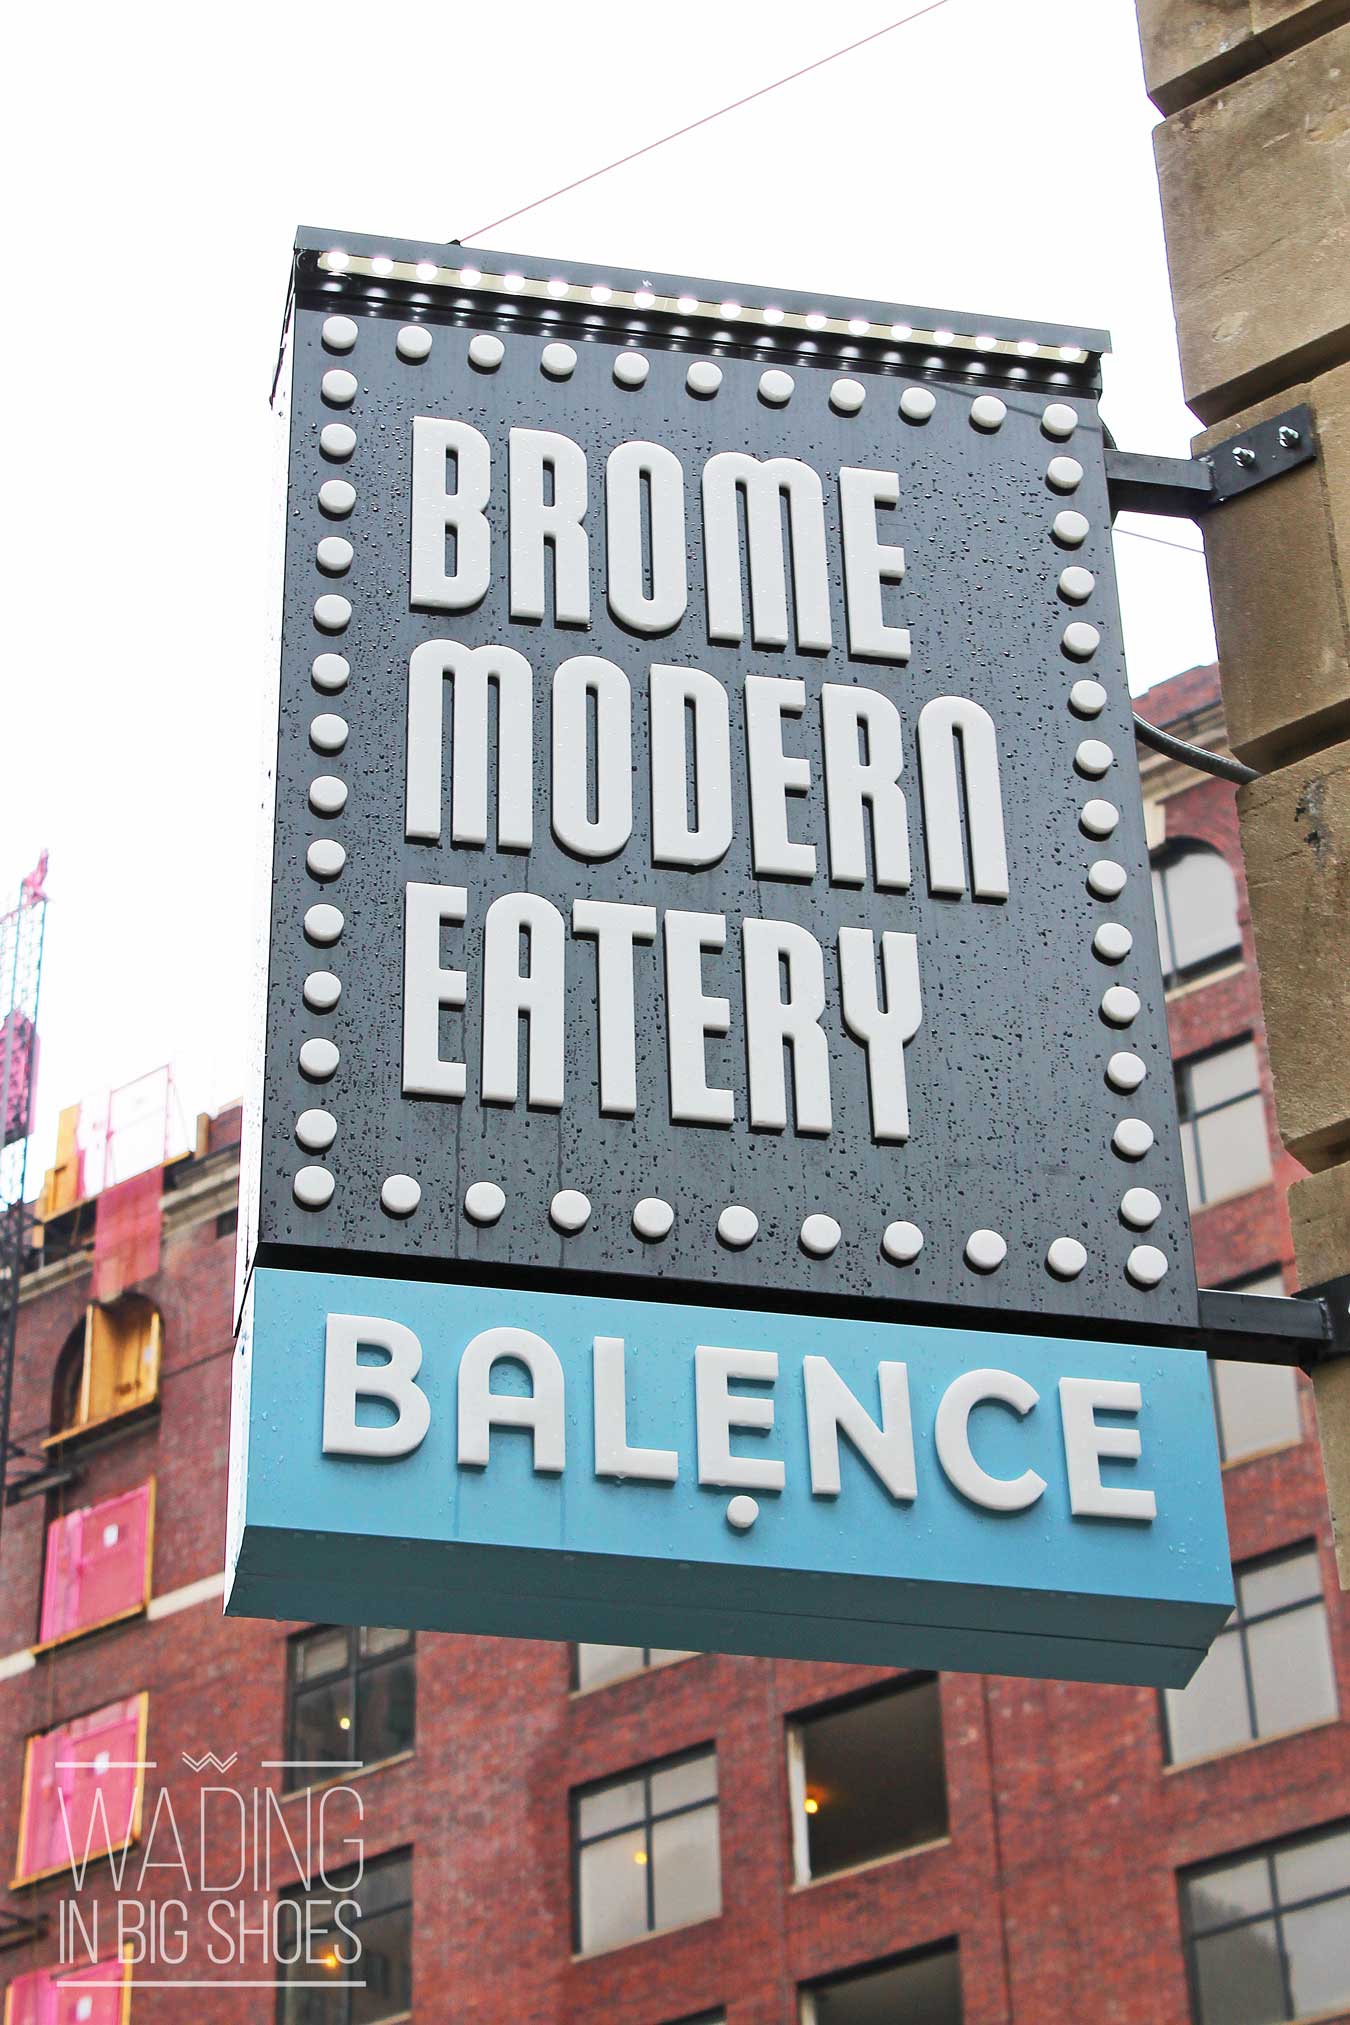 Brome Modern Eatery In Downtown Detroit Is As Stunning As It Is Delicious | (via Wading in Big Shoes) // Brome Modern Eatery in Downtown Detroit serves up fresh burgers, salads, juices, and more in a fine-casual restaurant setting. Organic ingredients pair with a beautifully organic setting, including a living wall, living ceiling, second-story sky walk and juice bar, and original murals to convey the perfect mix of modern and natural decor.